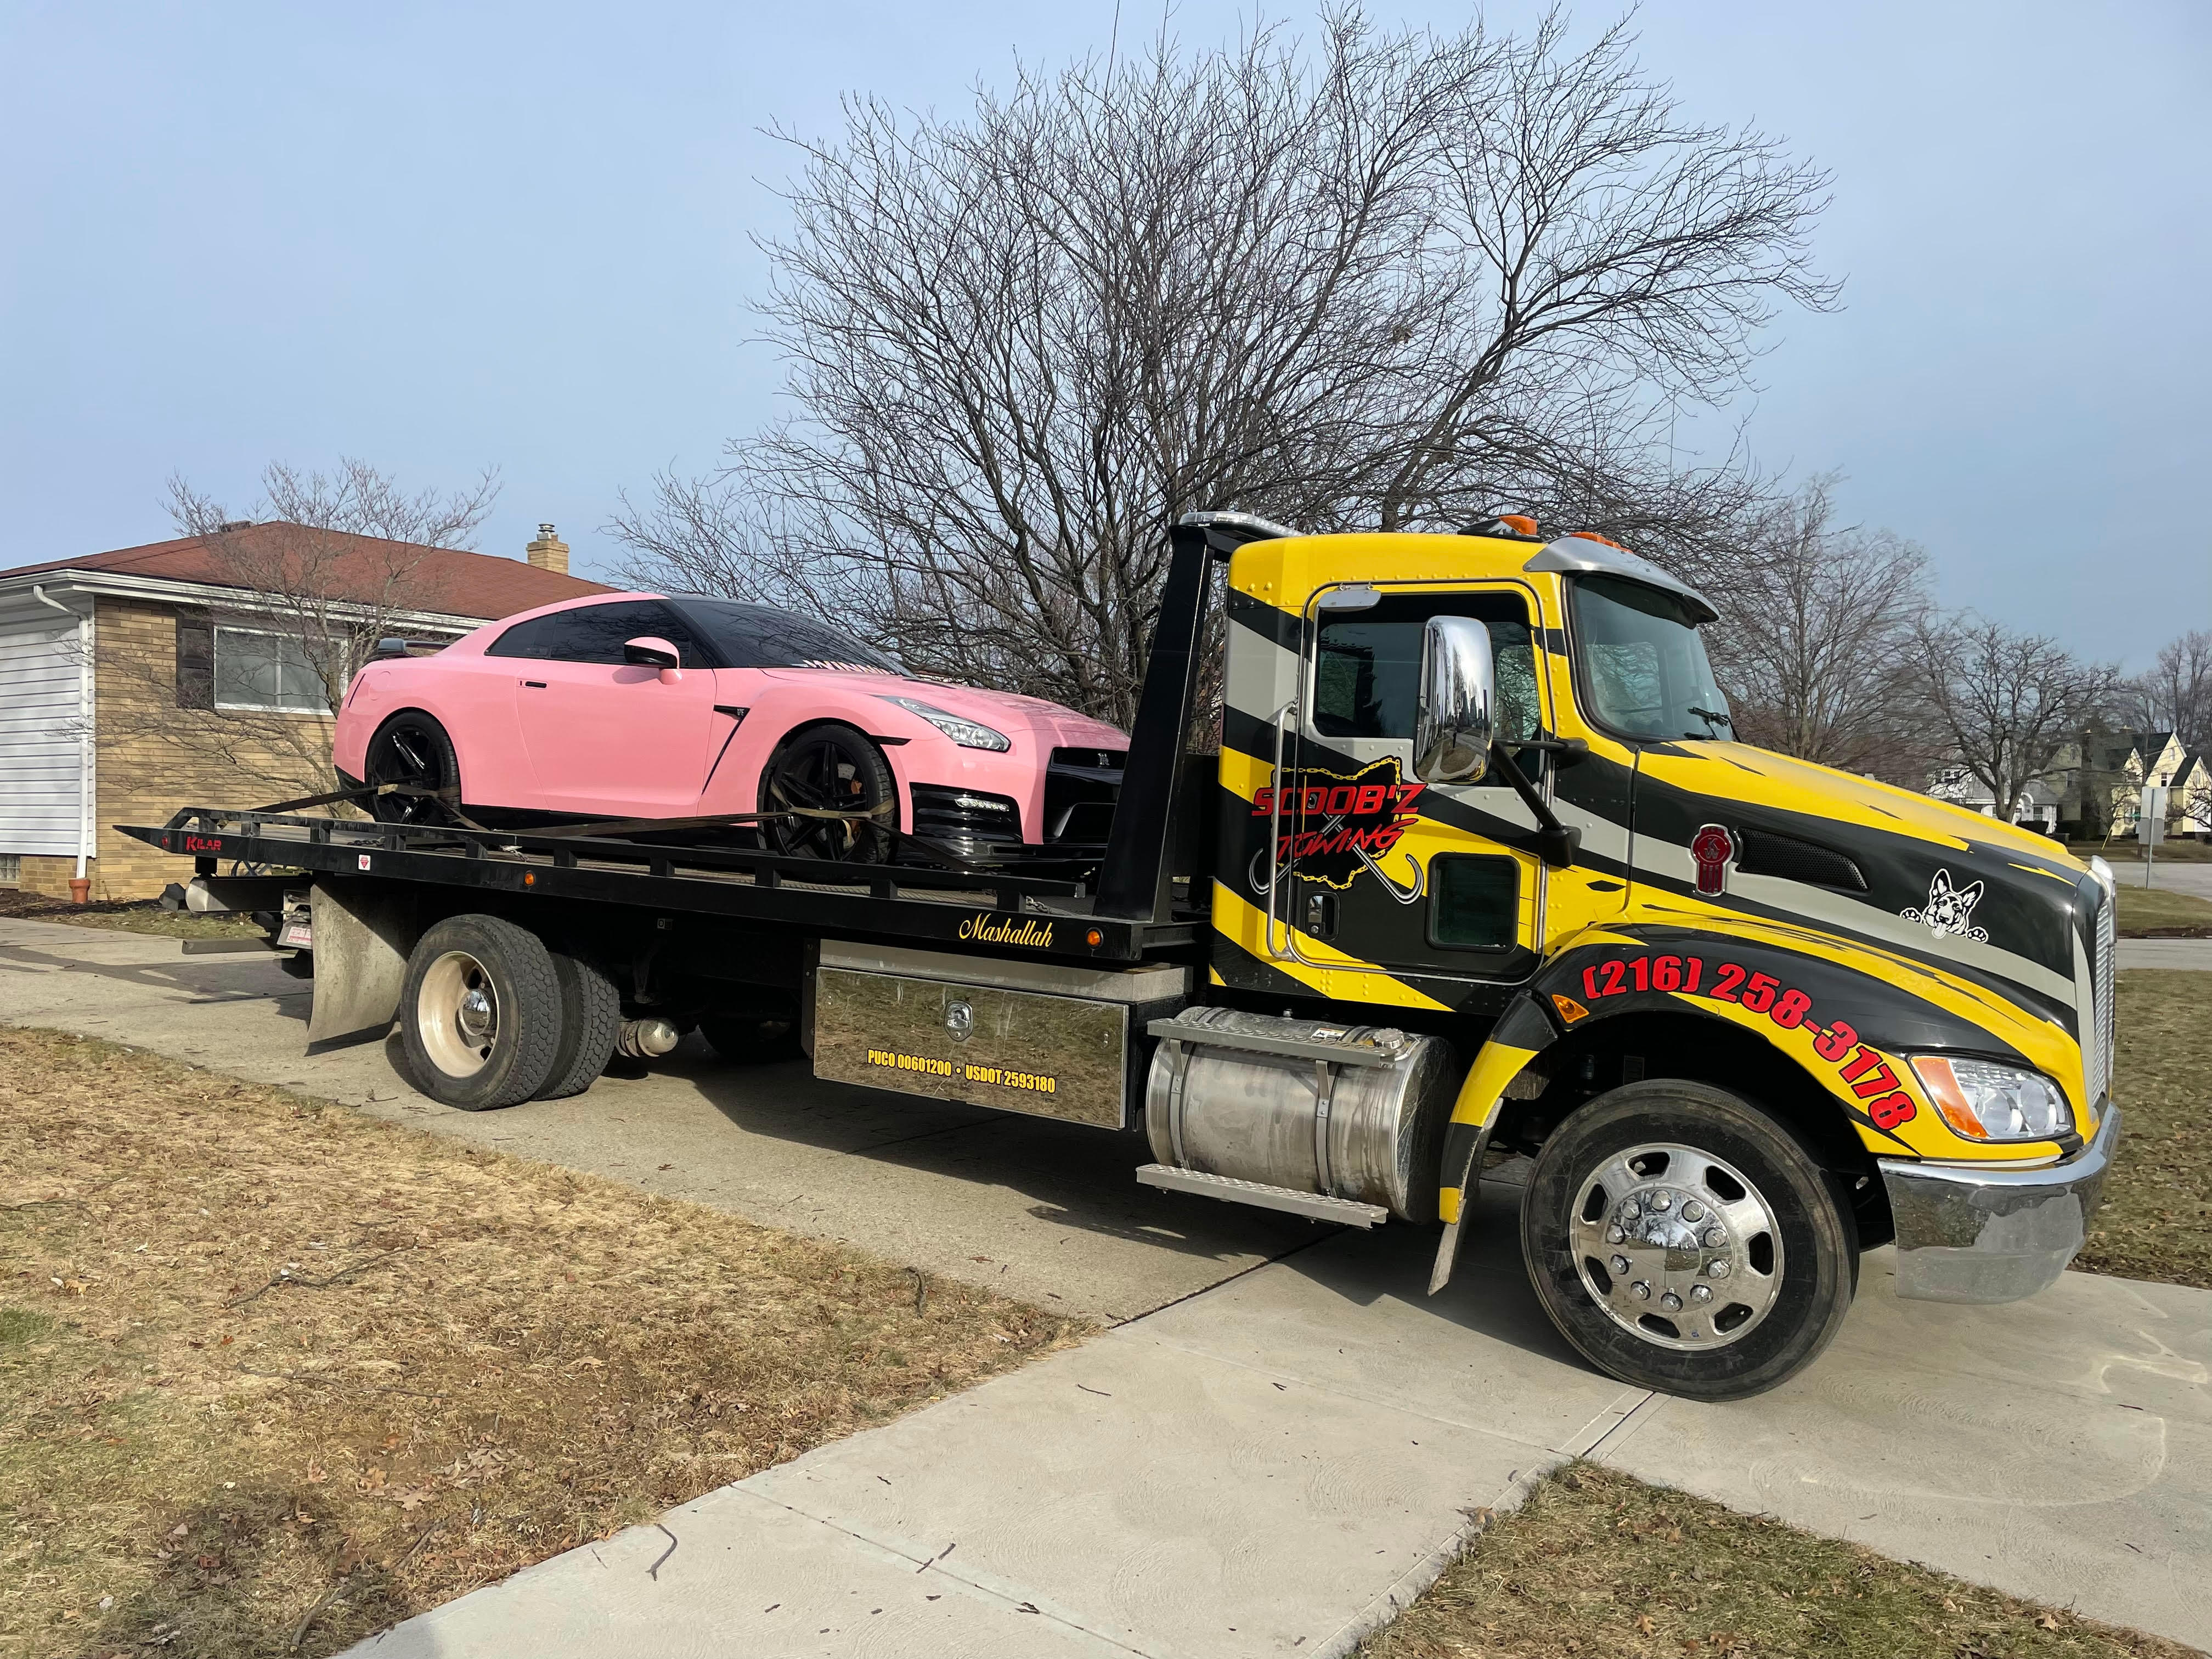 Scoob'z Towing & Recovery - Cleveland, OH 44102 - (216)450-4767 | ShowMeLocal.com